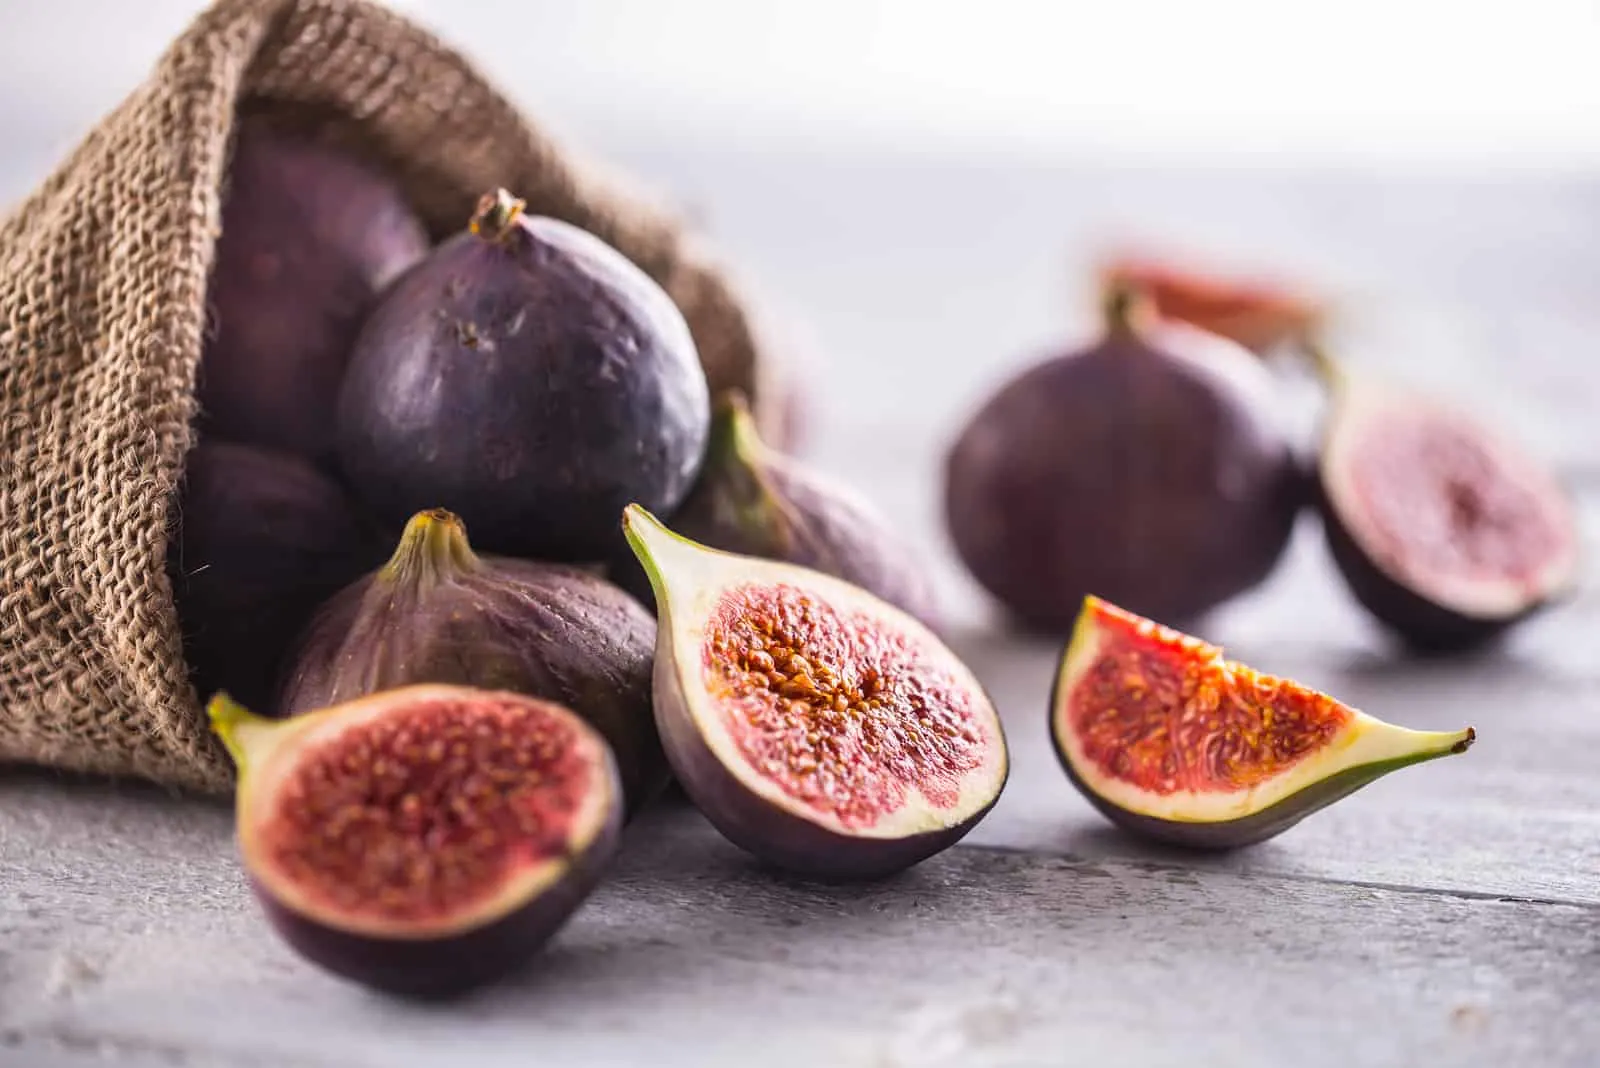 can figs hurt dogs